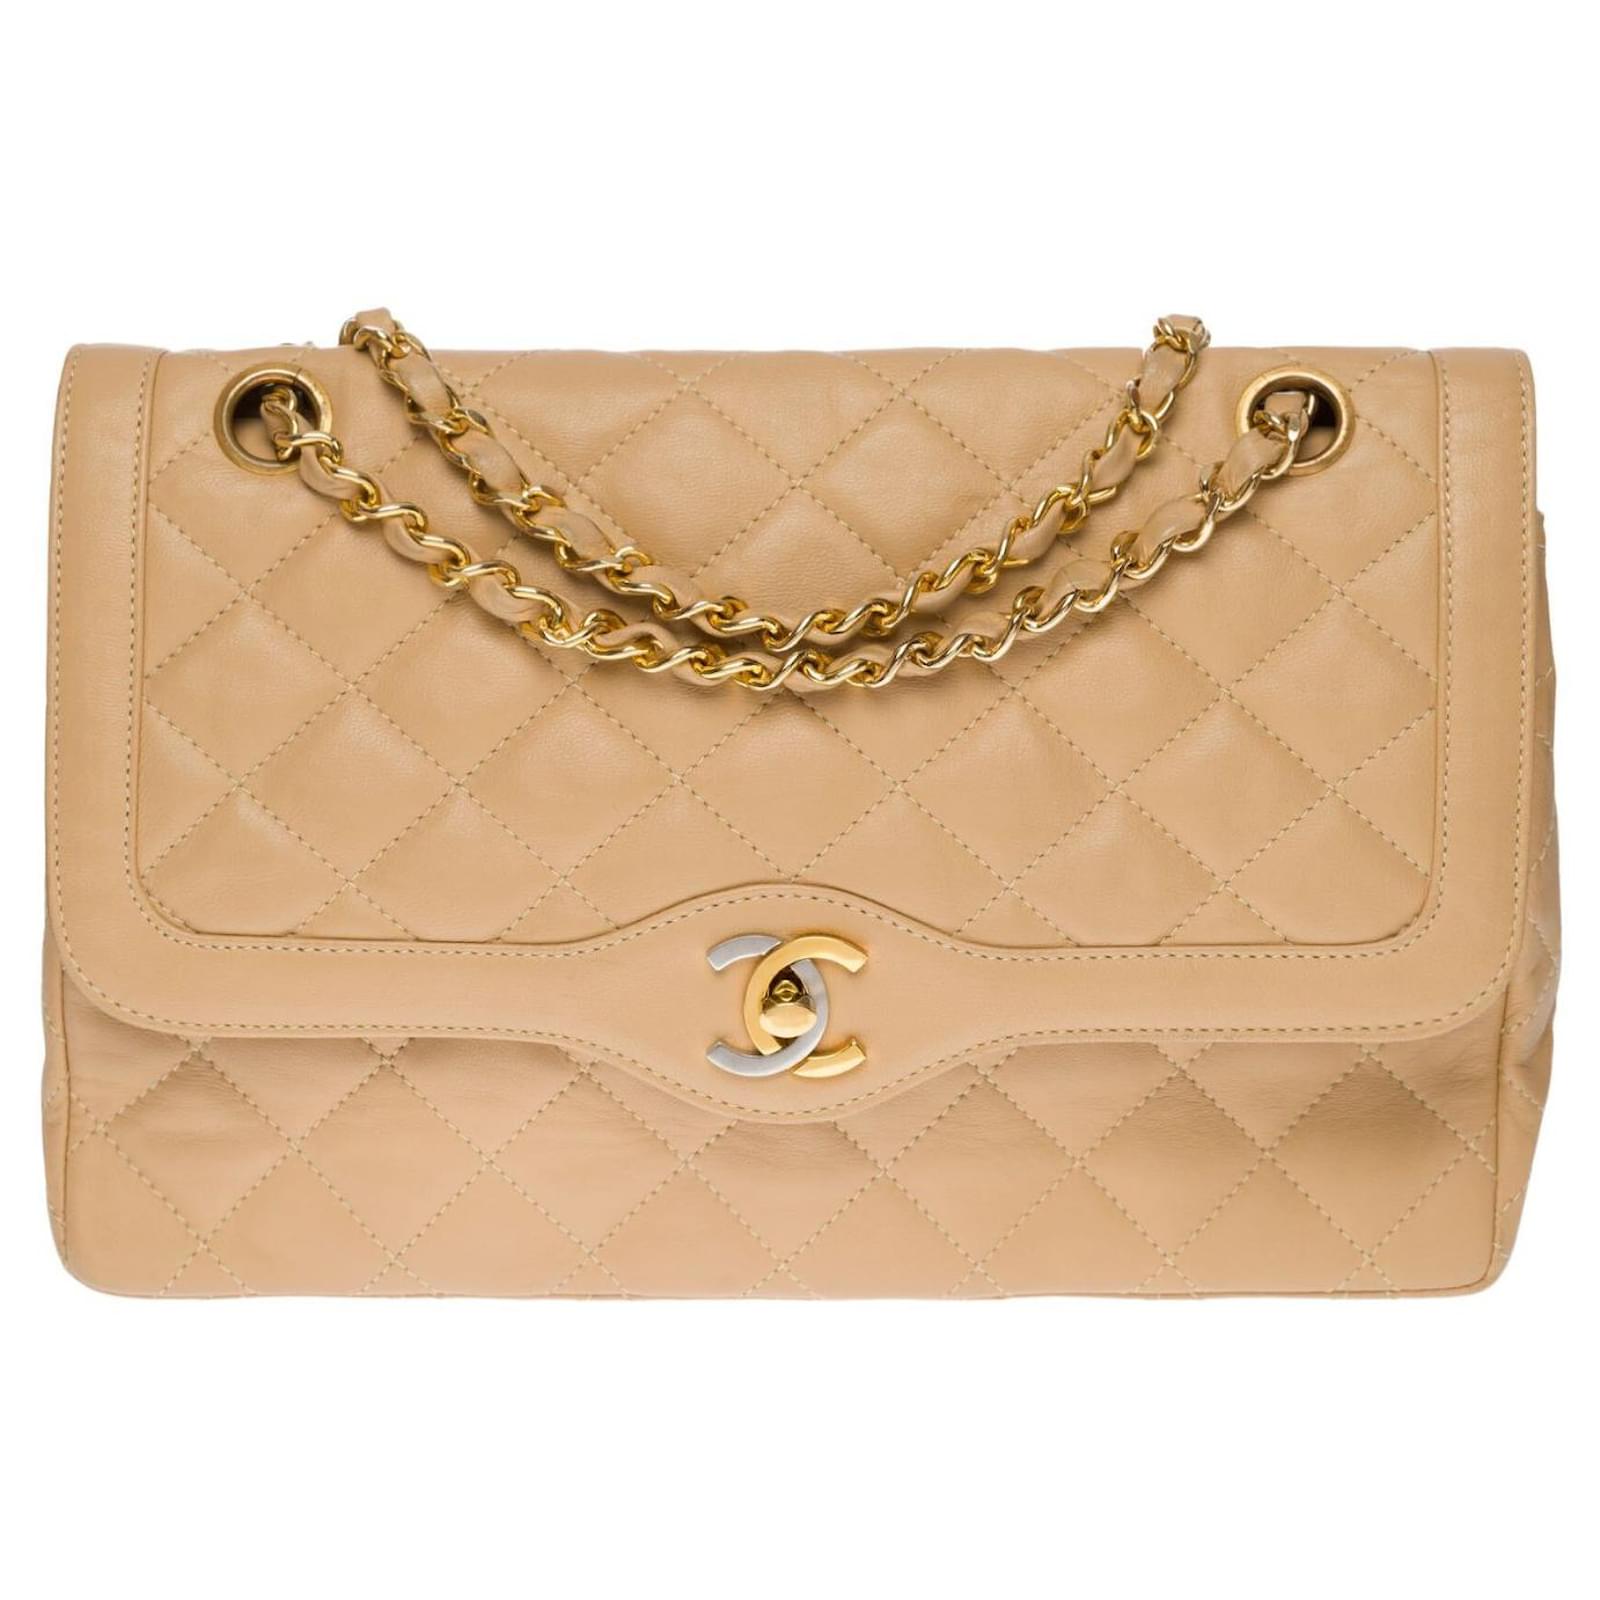 Chanel Gold Classic Medium Python Leather lined Flap Bag